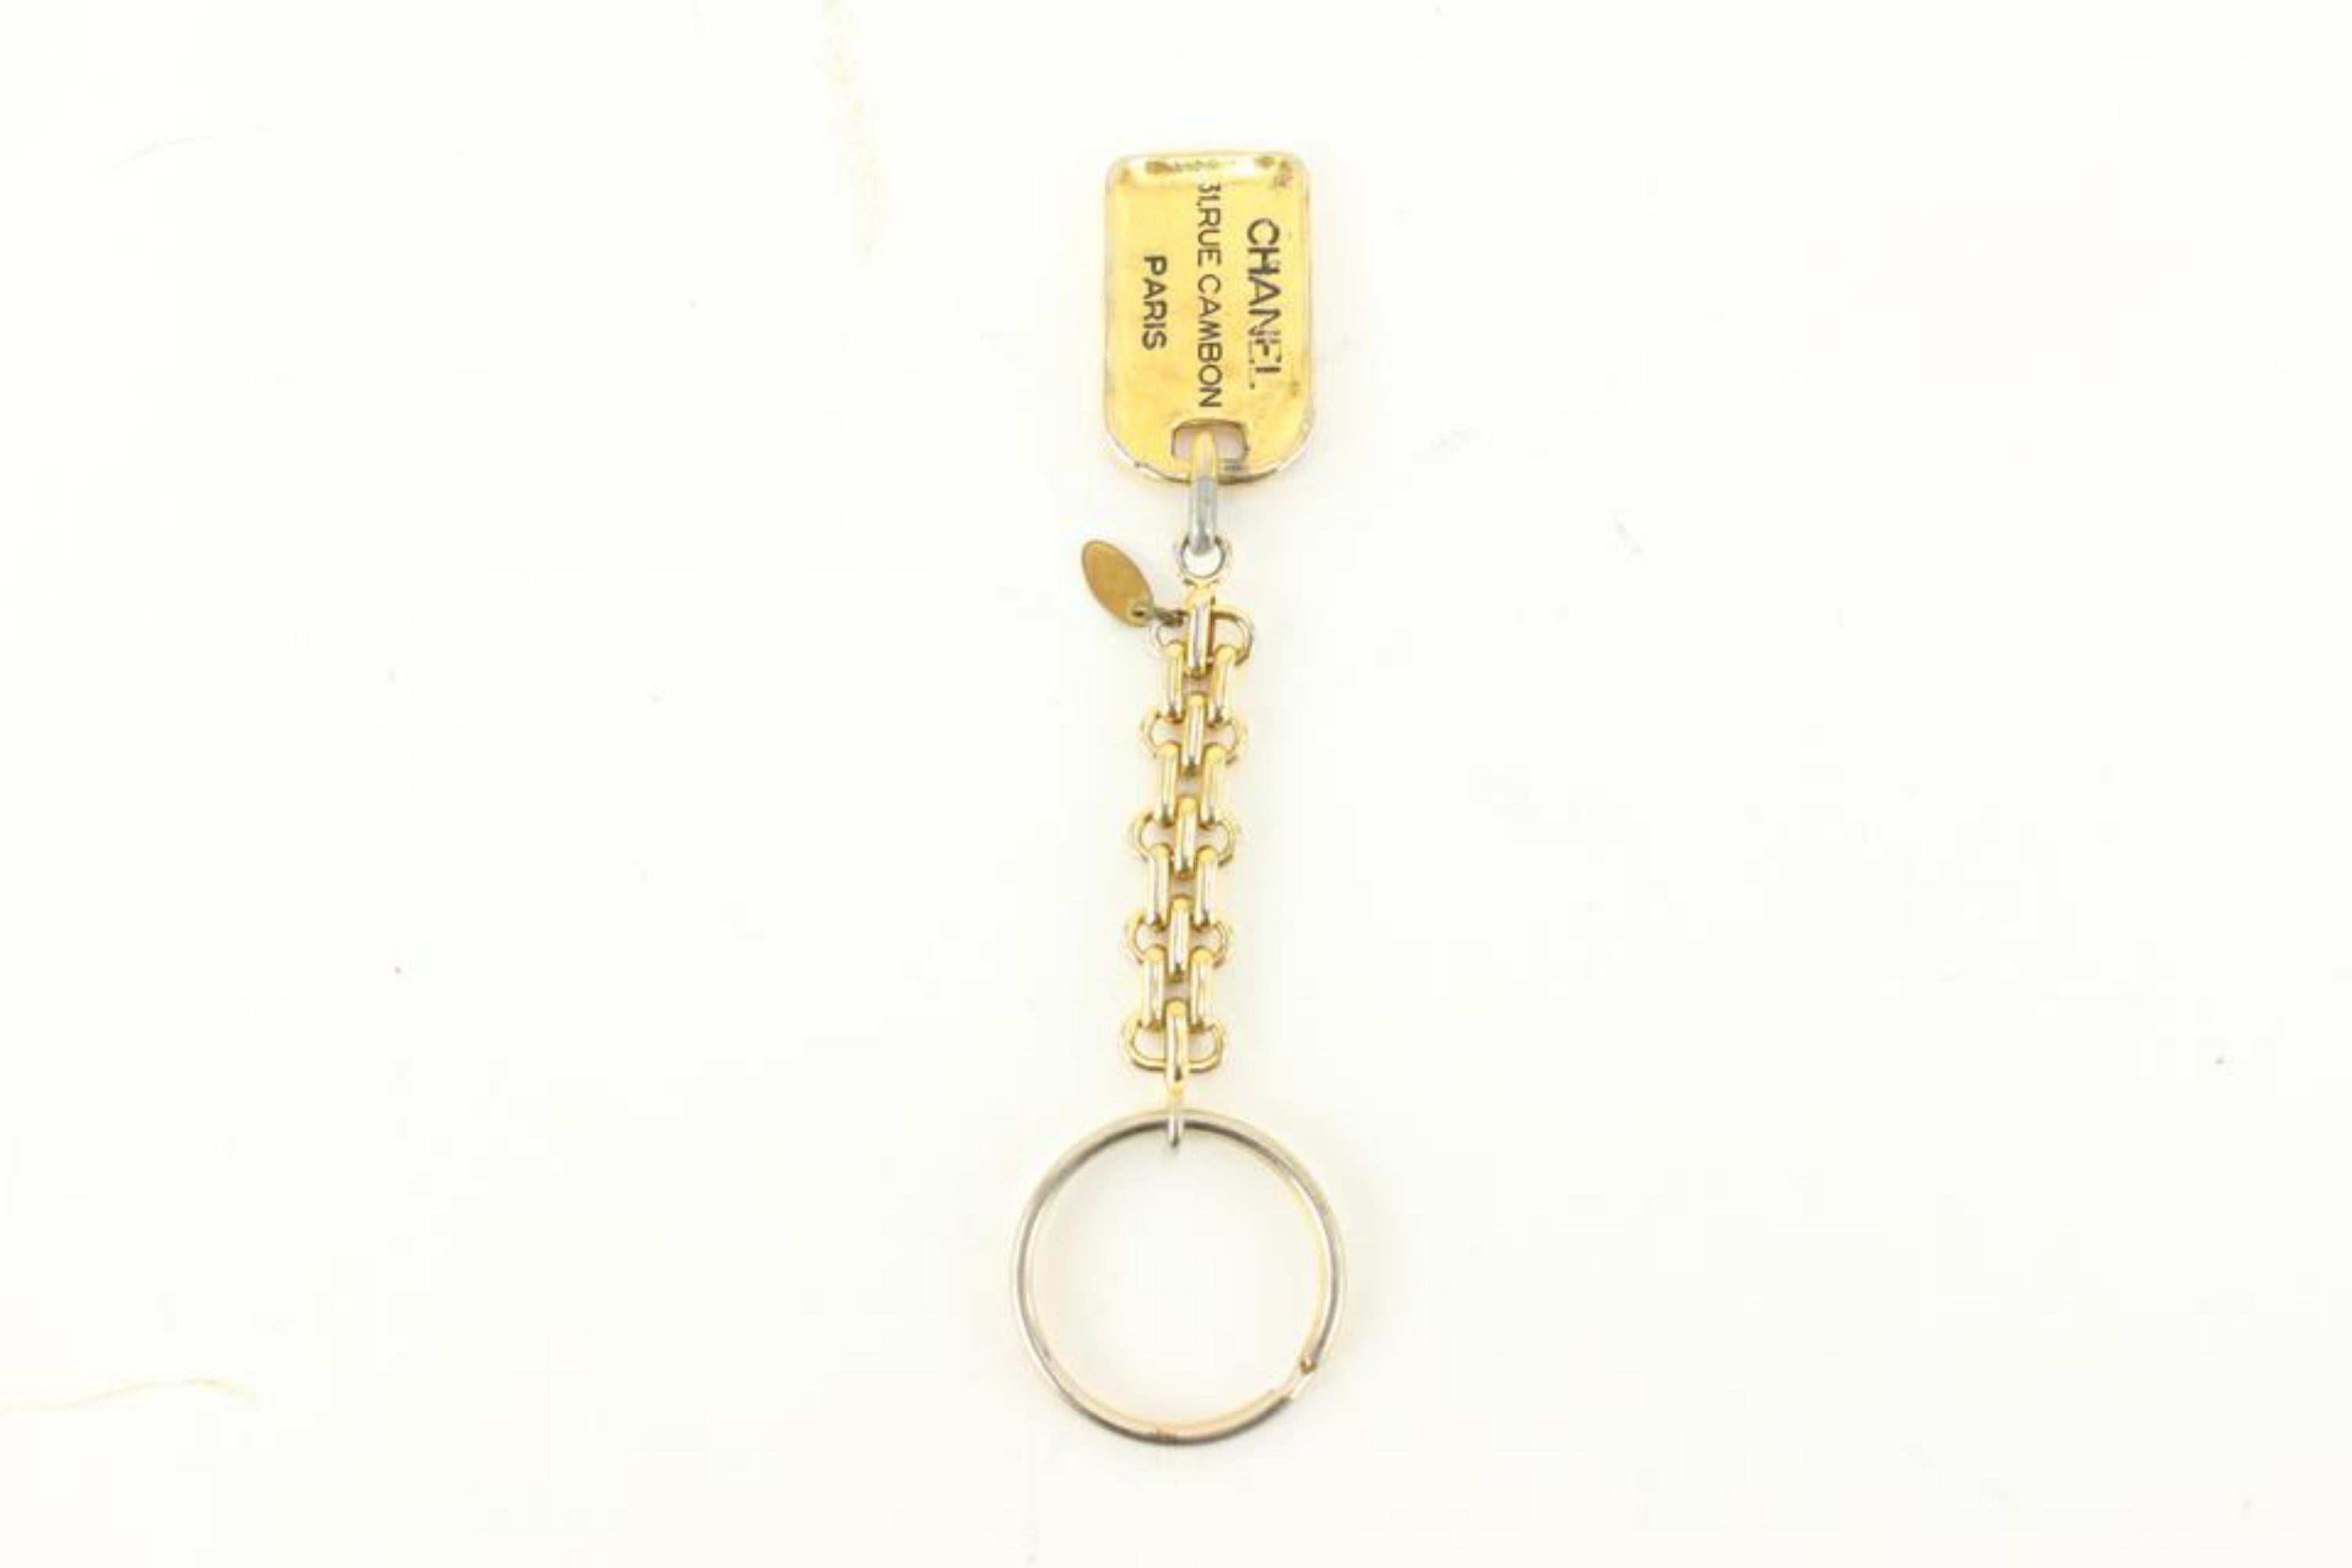 Chanel Vintage Gold Plated Rue Cambon CC Keychain Bag Charm Pendant 81ca711s 3